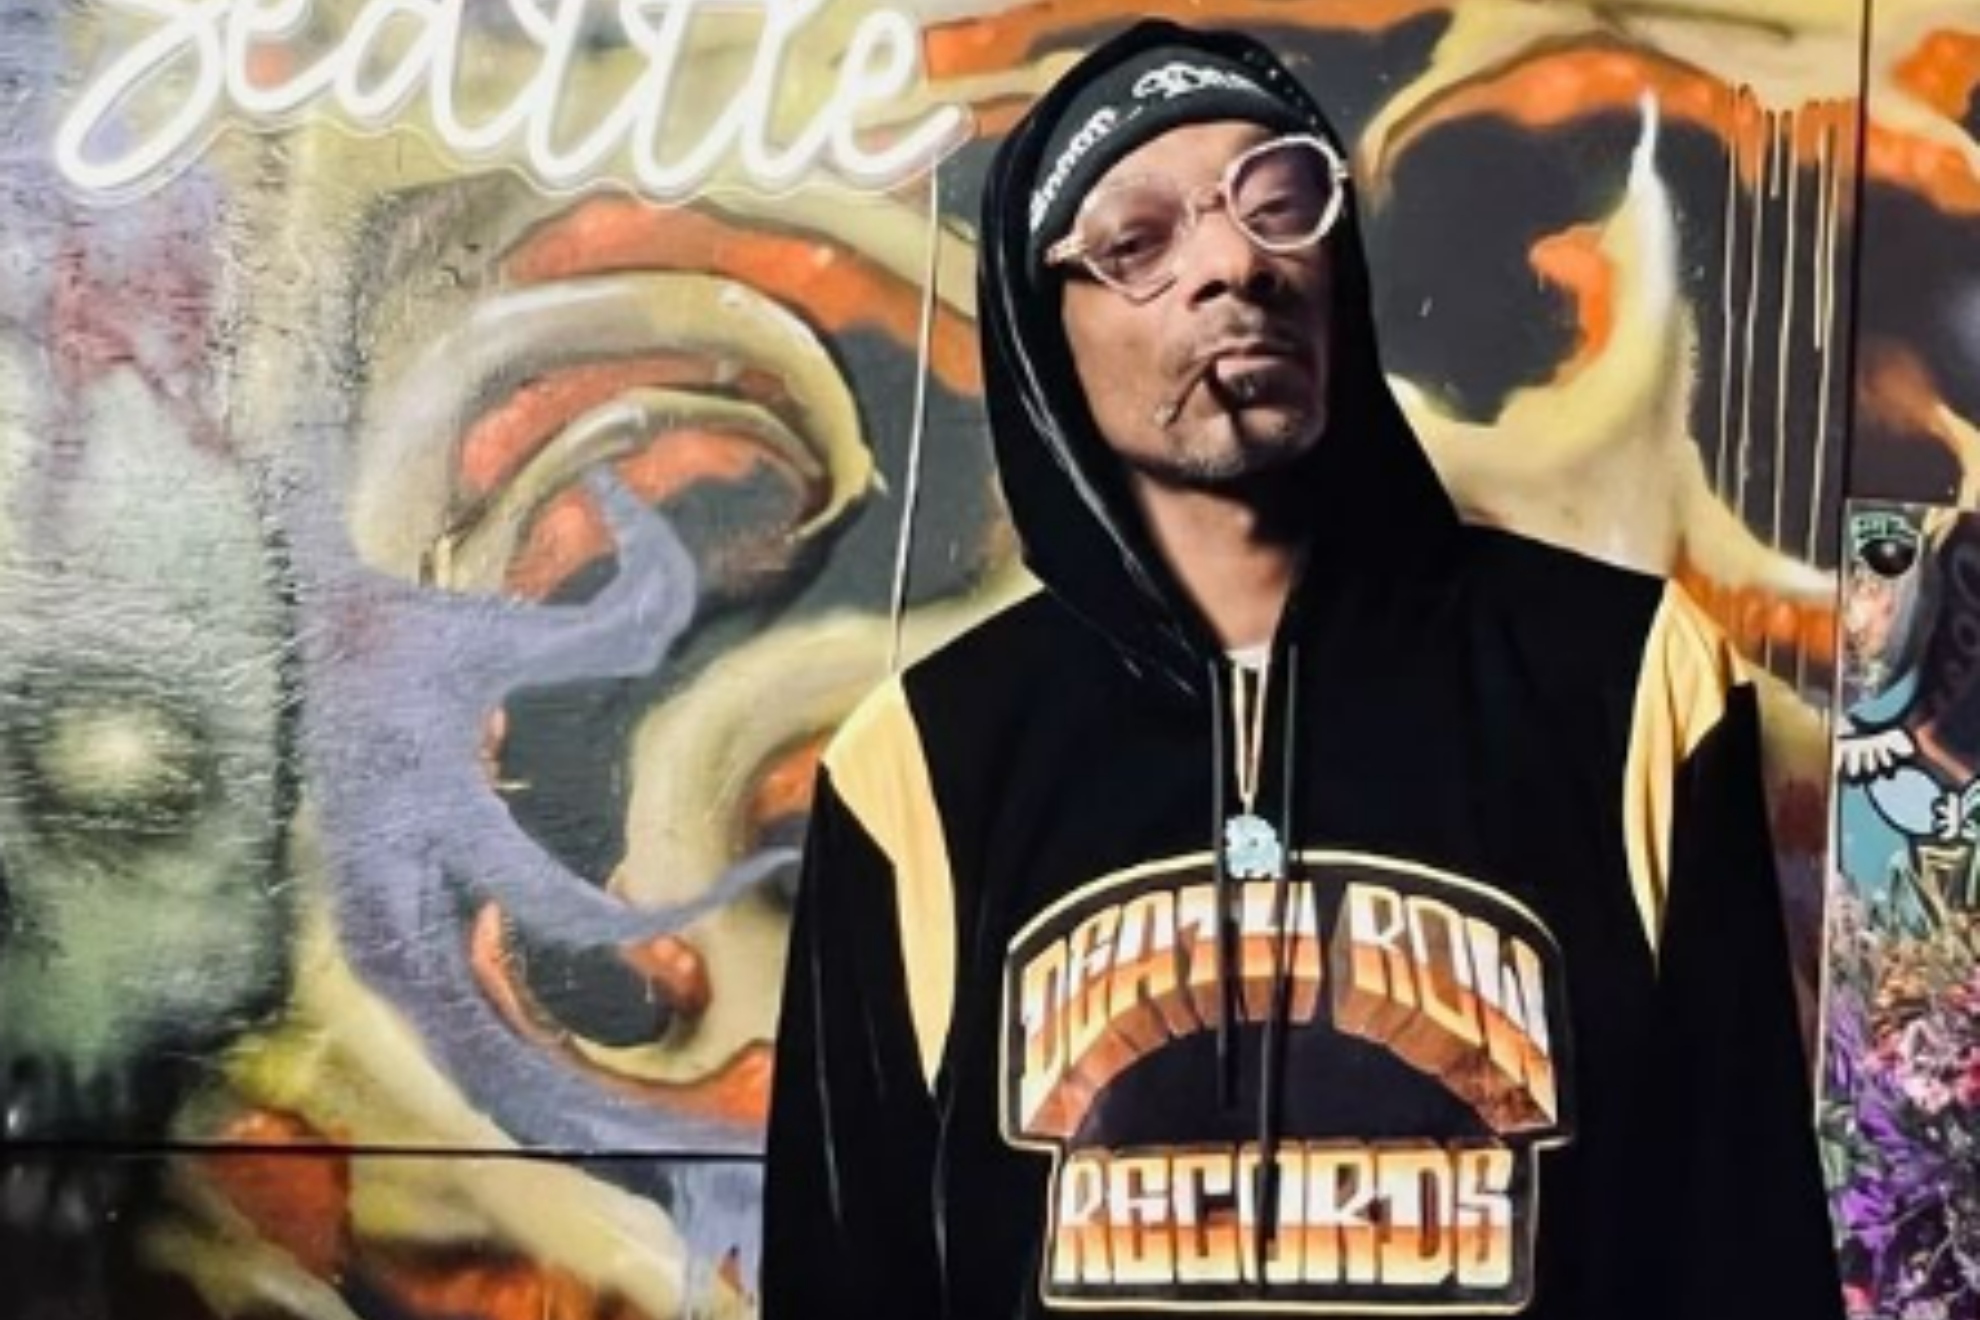 Snoop Dogg asks Twitter if he should be running it and gets over 3 Million responses